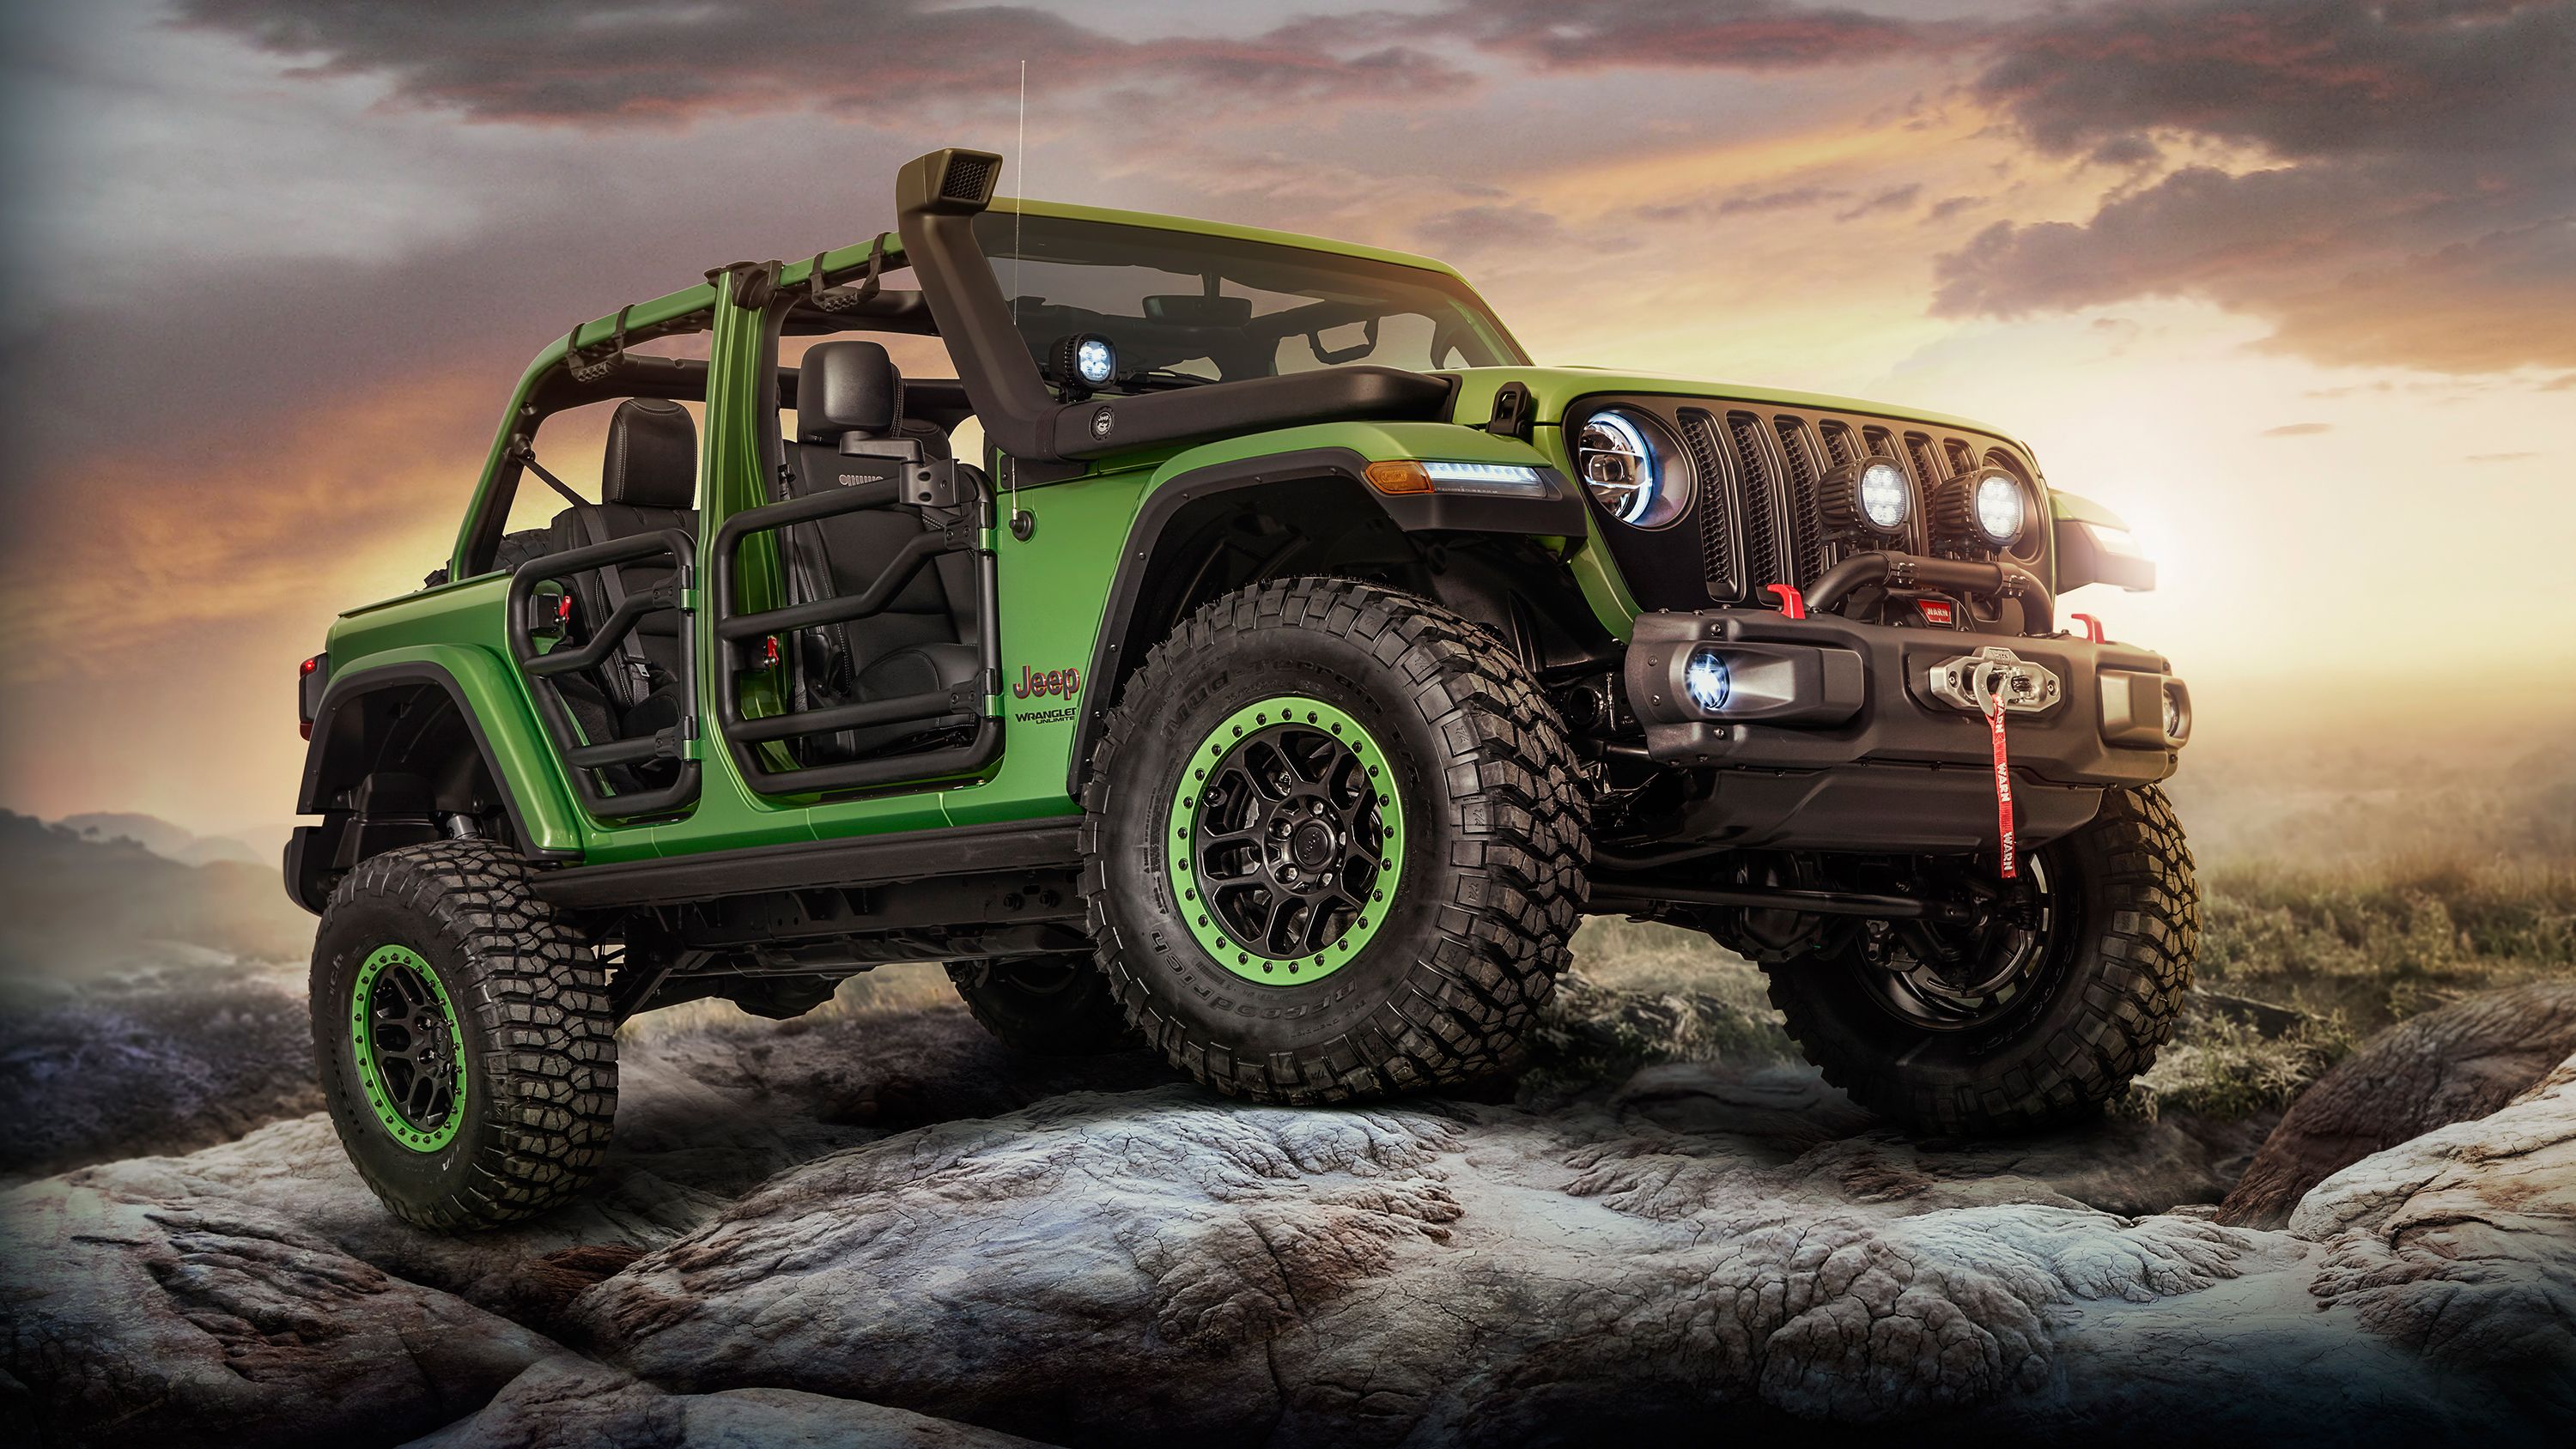 Download wallpaper 840x1336 black jeep wrangler 2021 iphone 5 iphone 5s  iphone 5c ipod touch 840x1336 hd background 27033